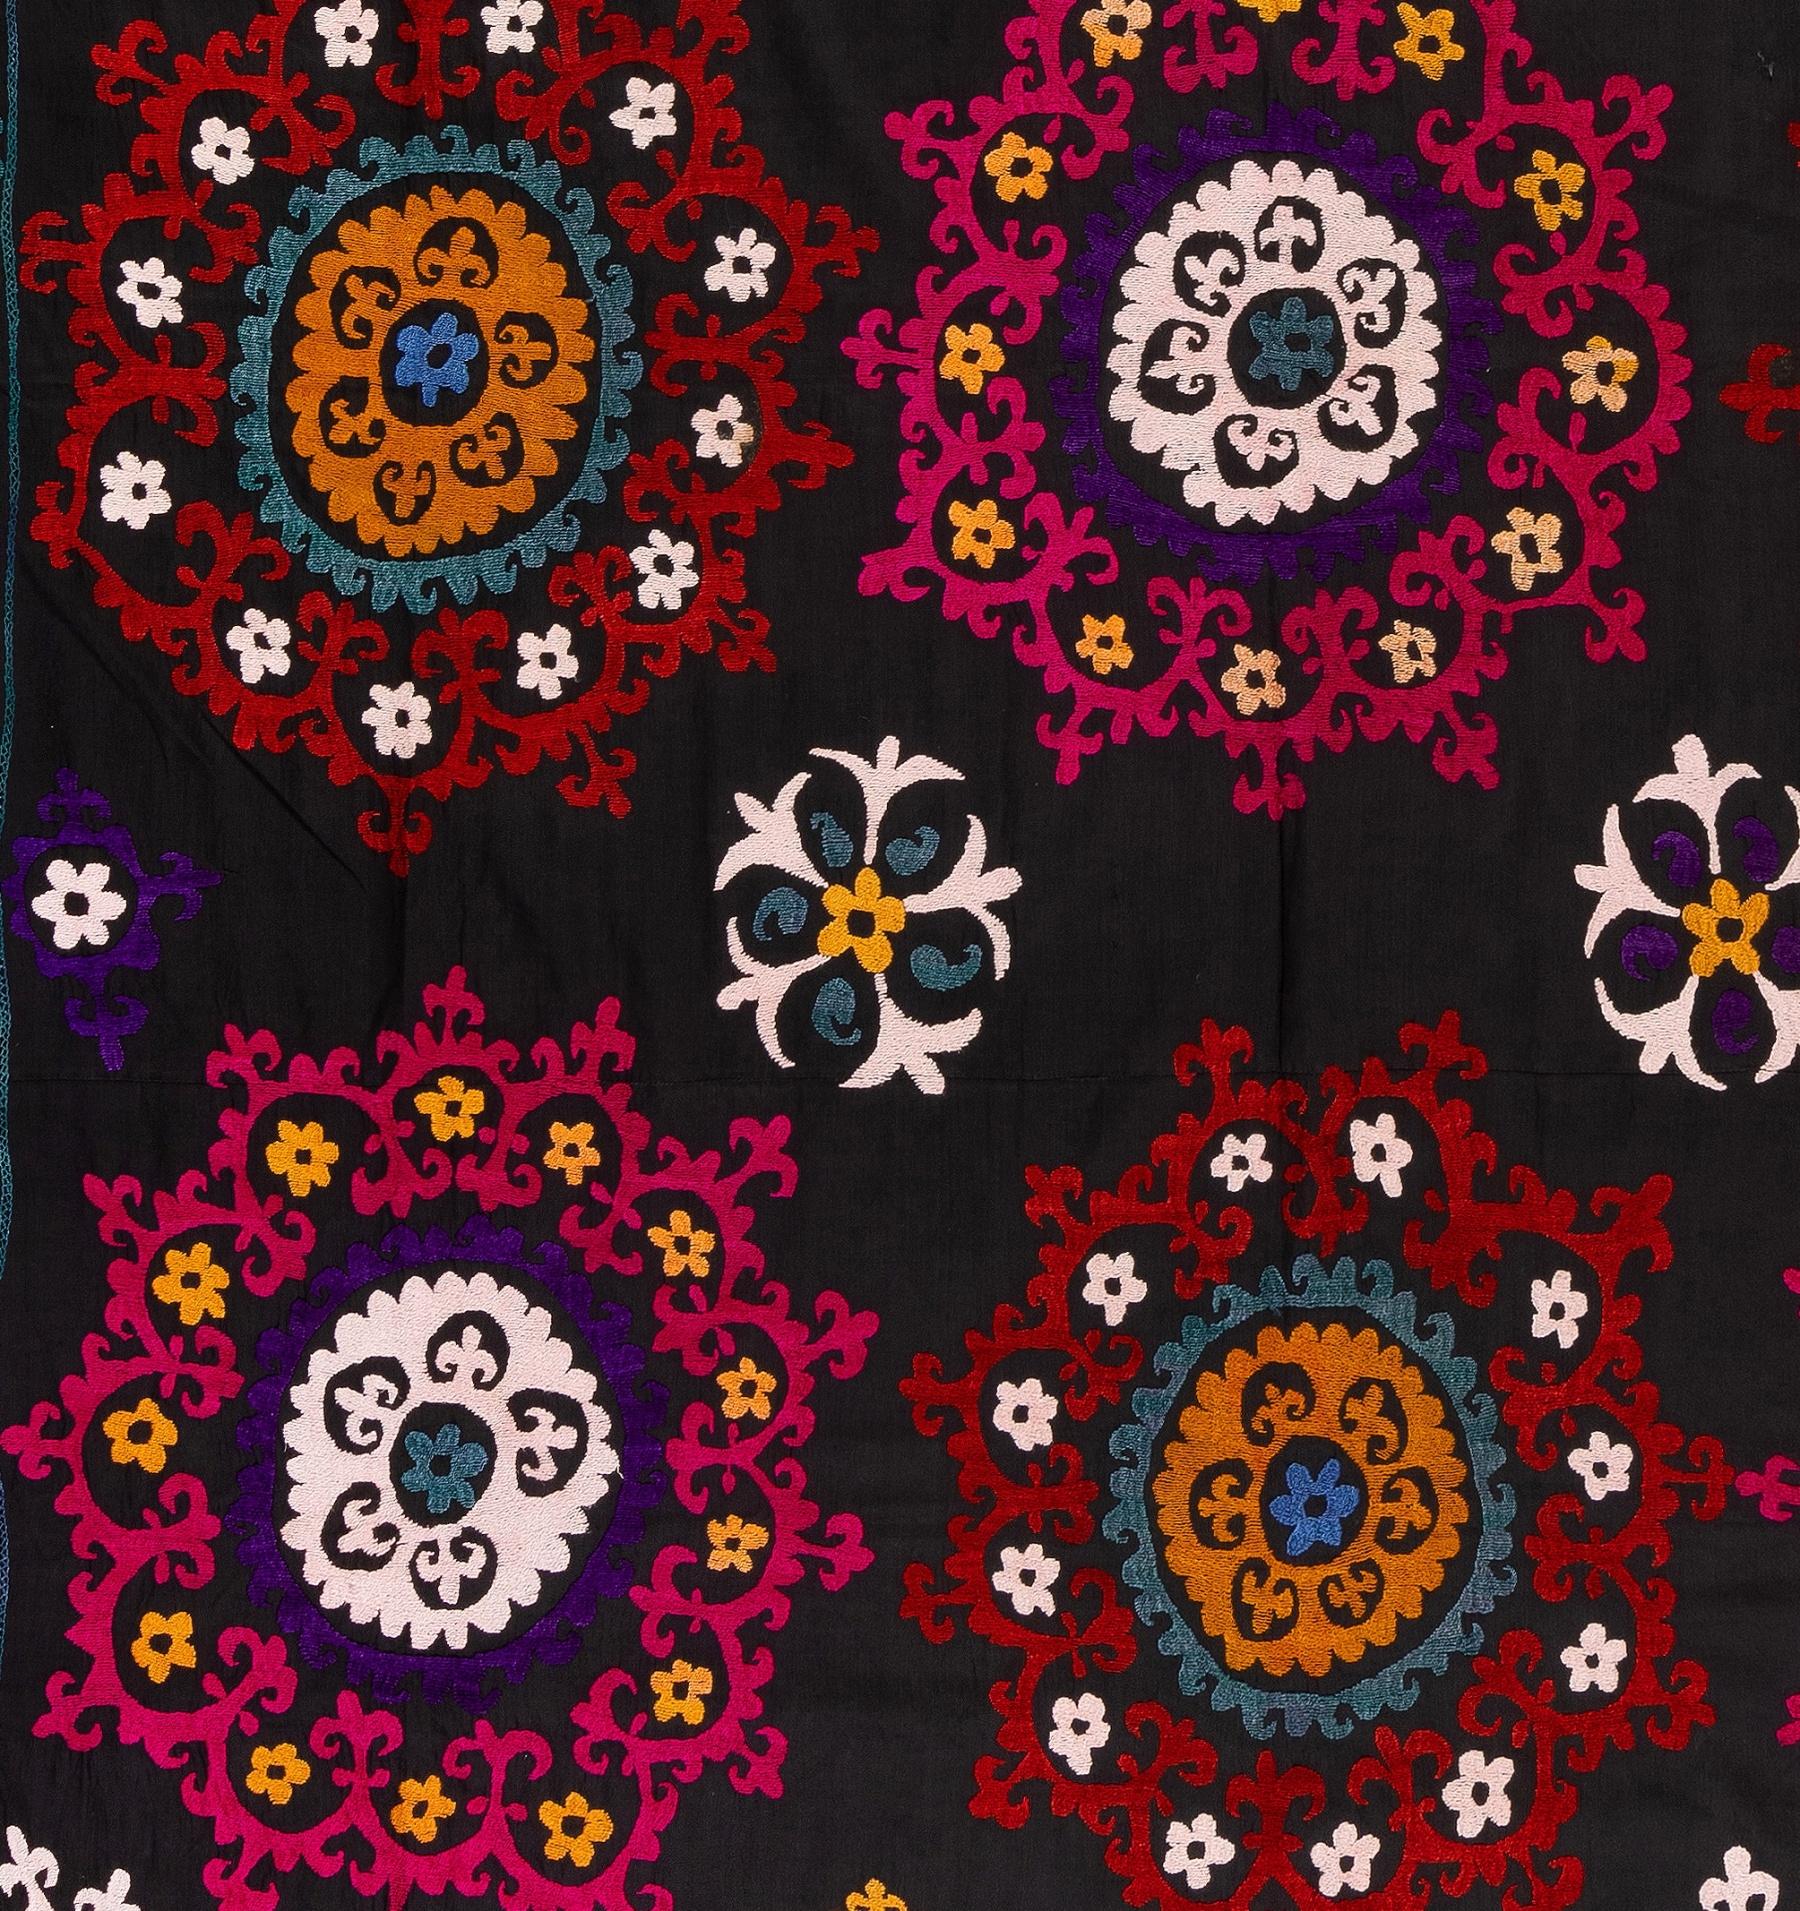 Suzani 6.4x7.8 Ft Silk Embroidery Bed Cover. Black Wall Hanging. Needlework Tablecloth For Sale